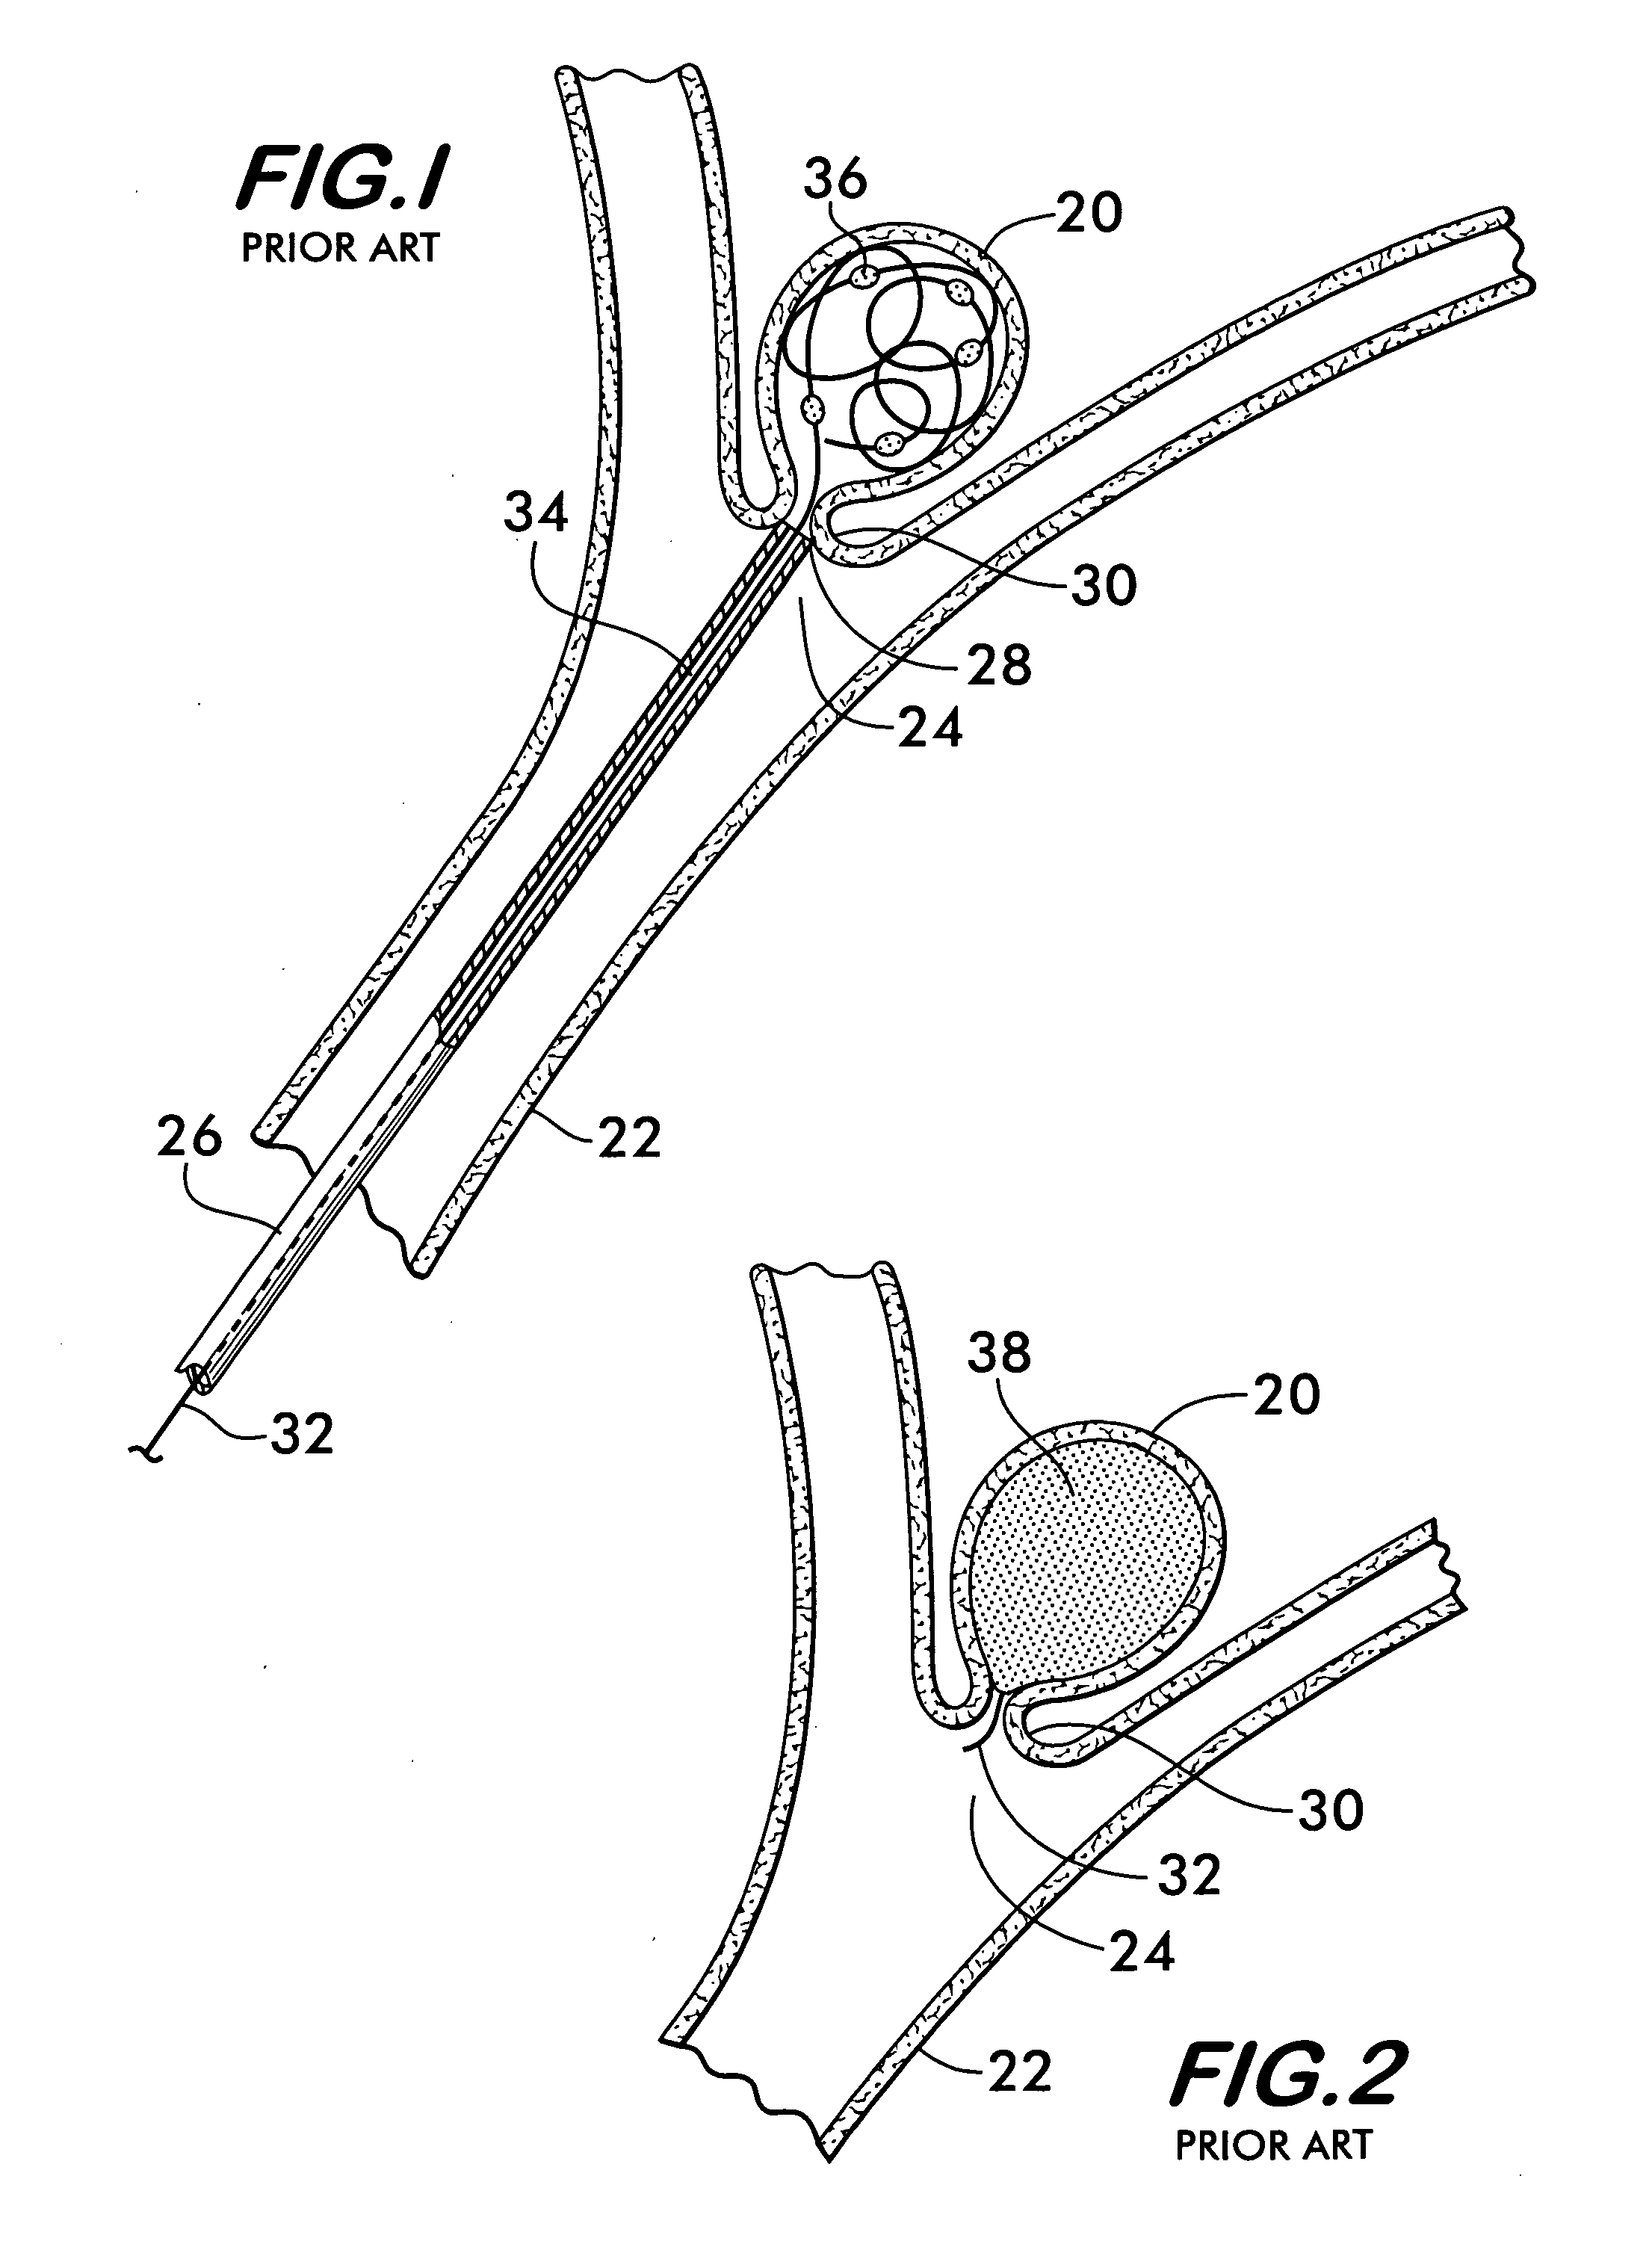 Three-dimensional coils for treatment of vascular aneurysms